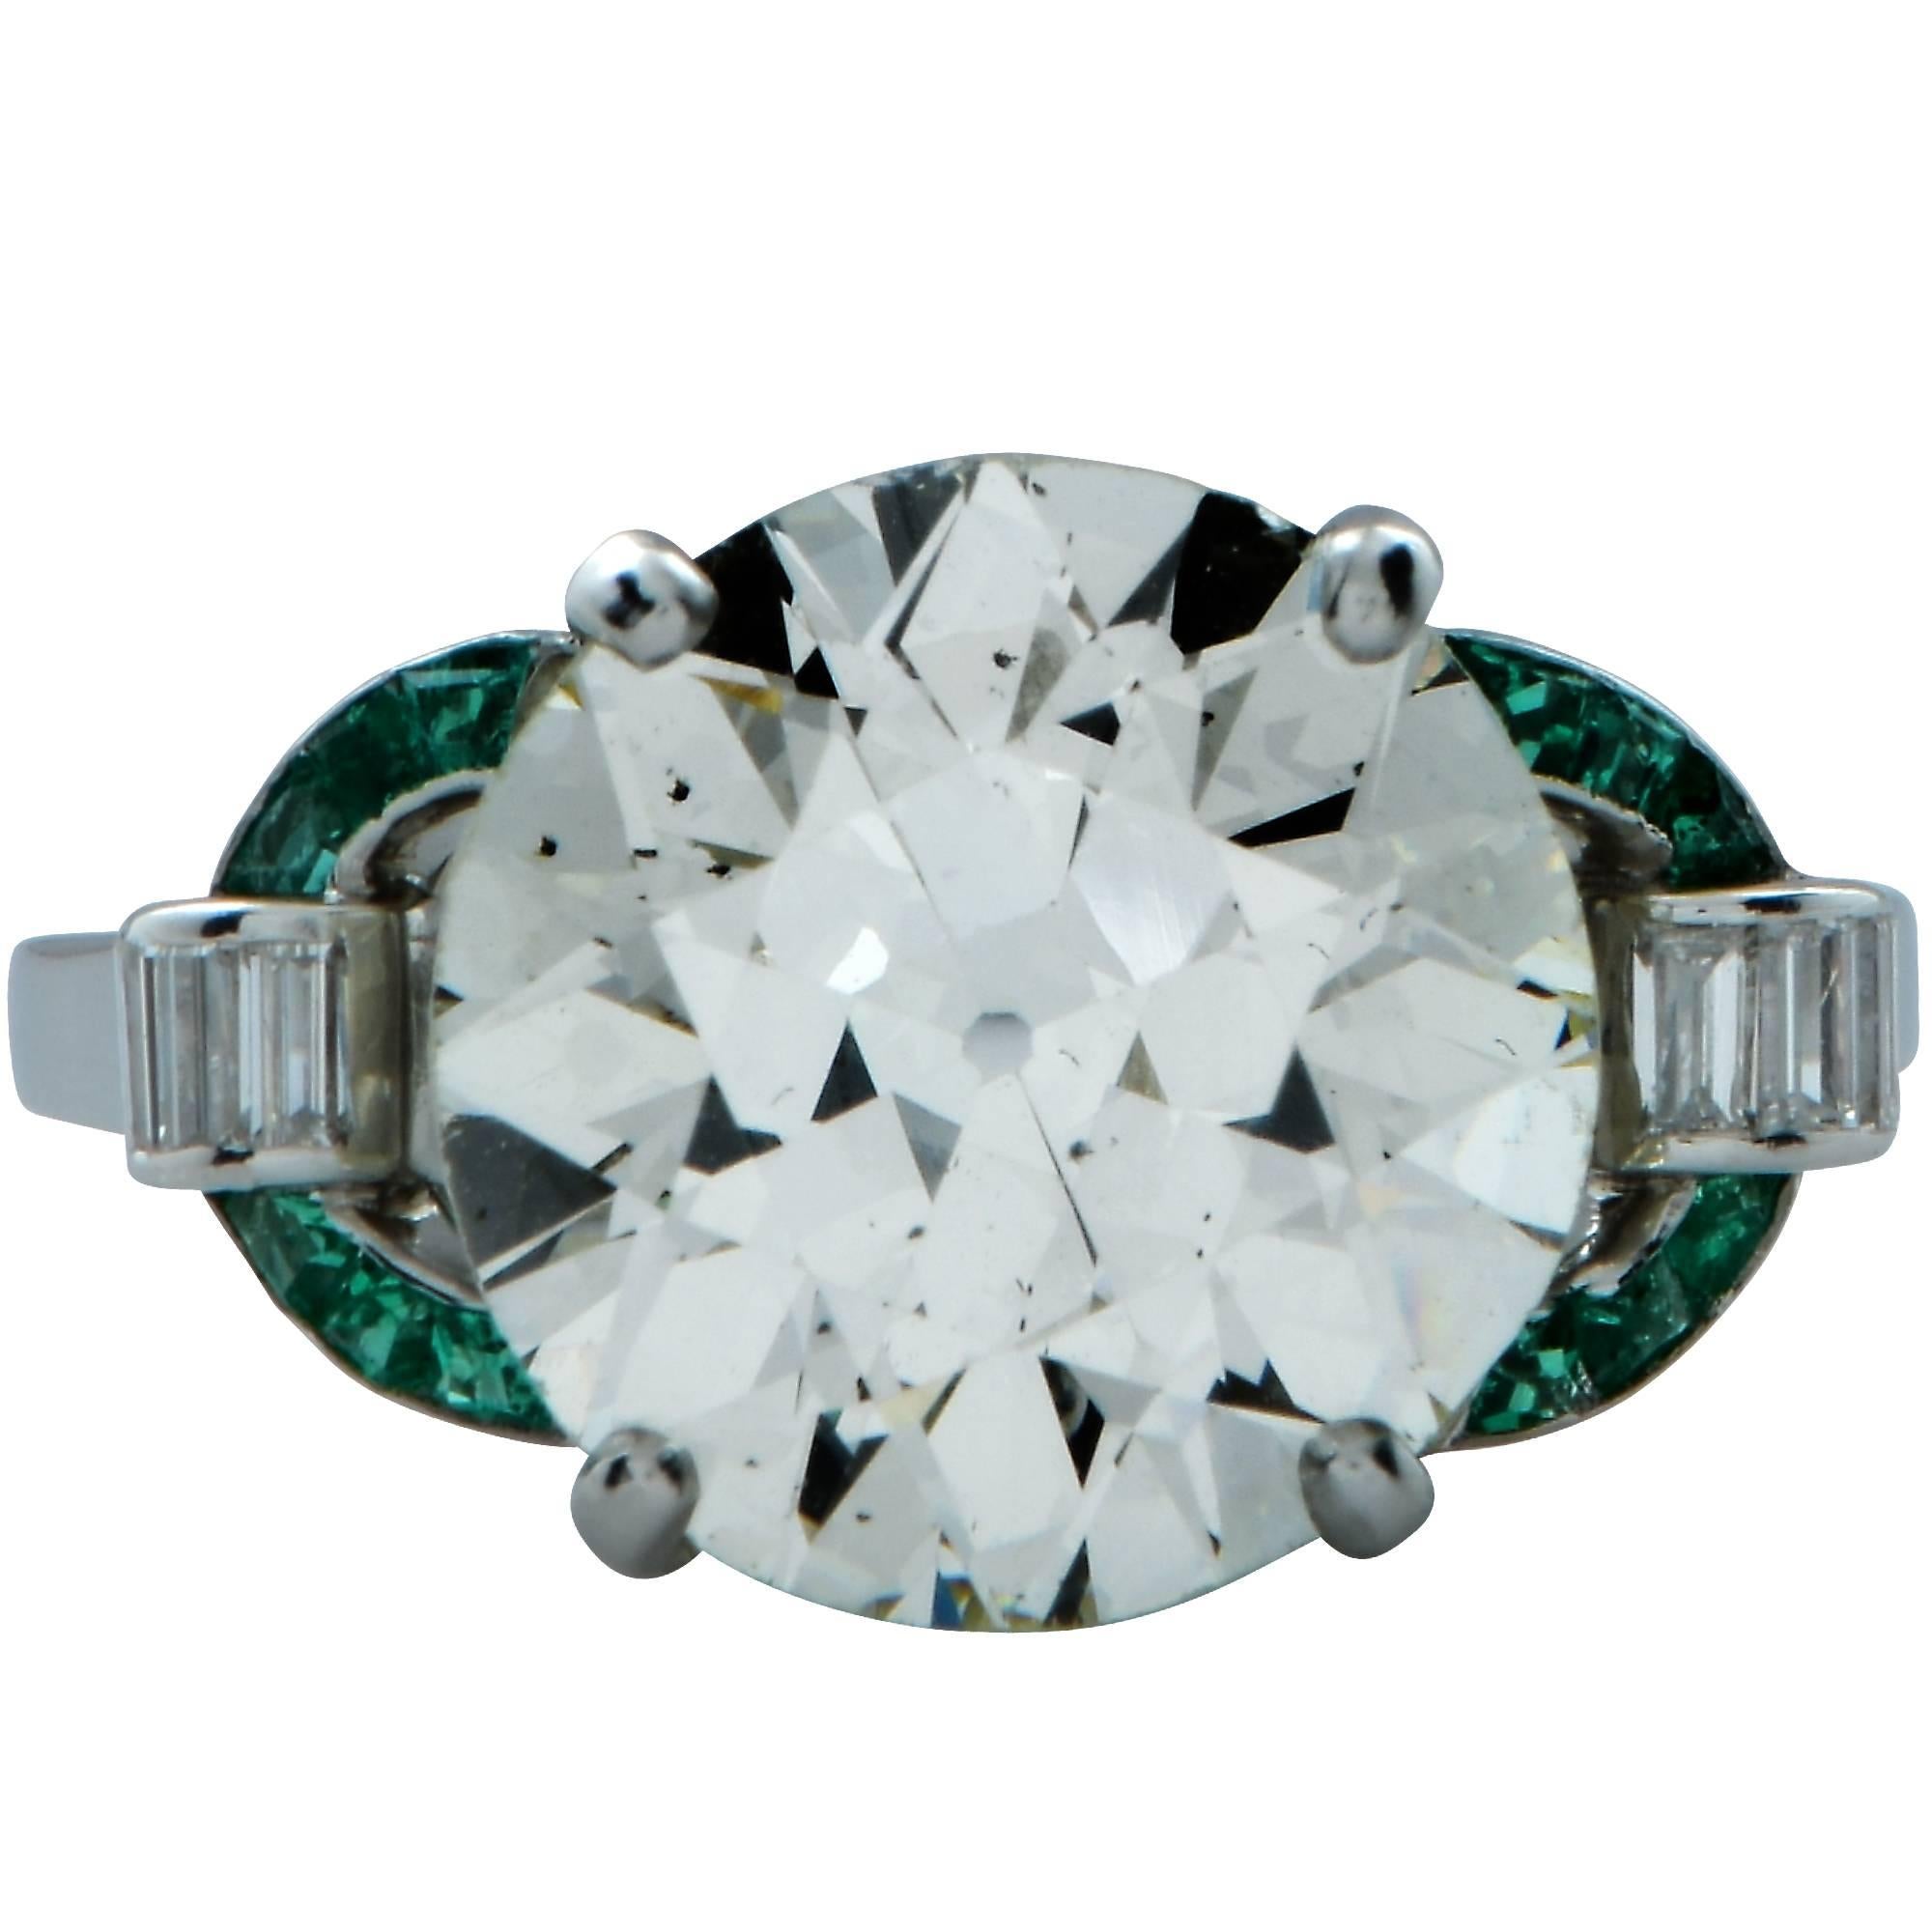 Platinum Art Deco engagement ring featuring a spectacular GIA graded 6.19ct European cut diamond, L color and SI1 clarity flanked by 12 carré cut emeralds weighing approximately .35cts and further accented by 6 baguettes weighing approximately